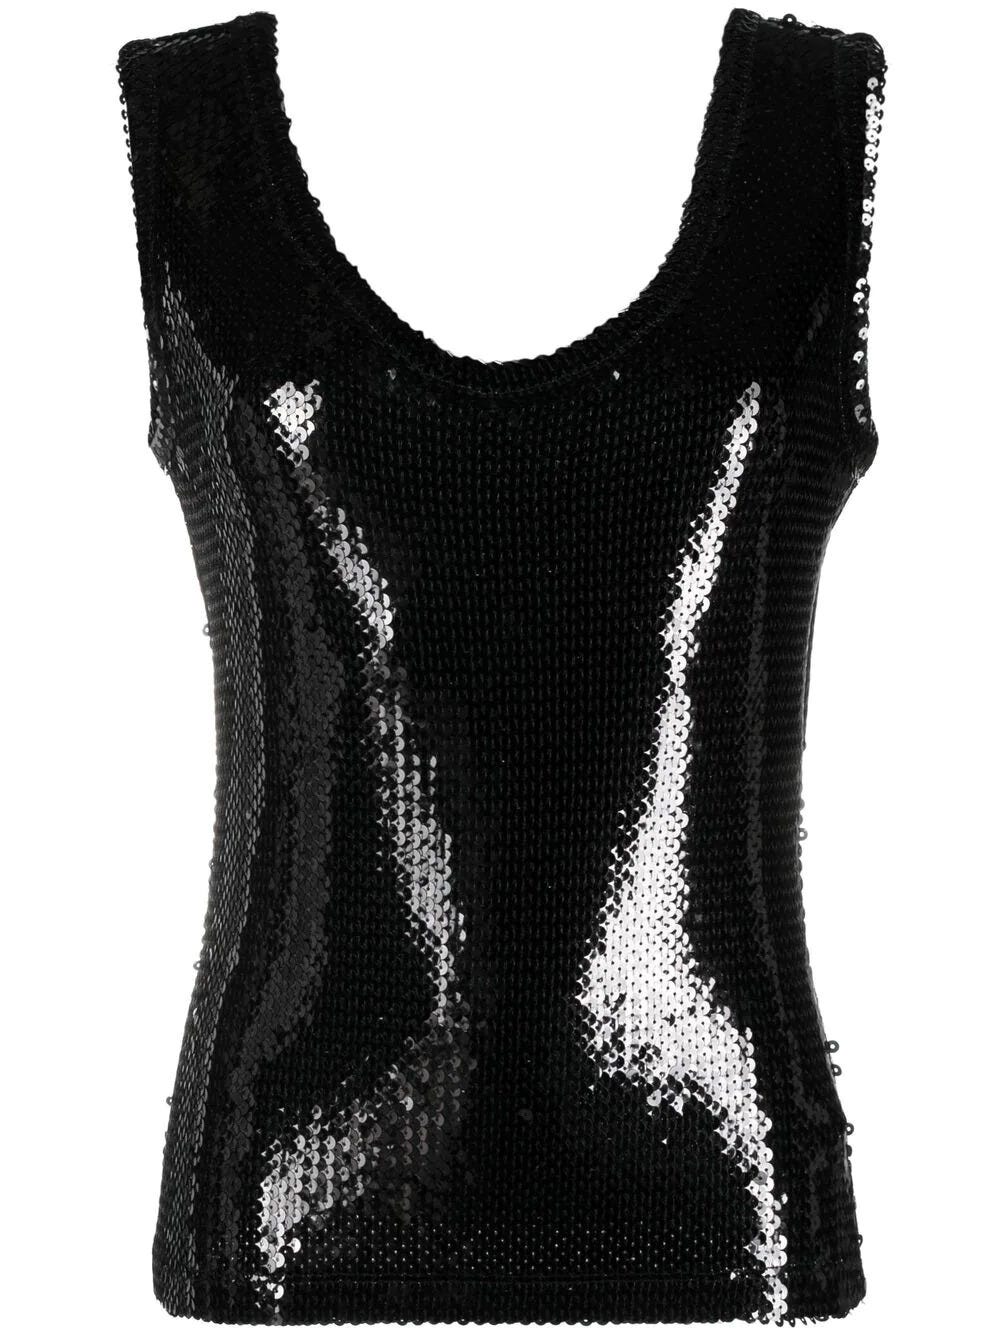 PACO RABANNE BLACK SEQUINED TOP